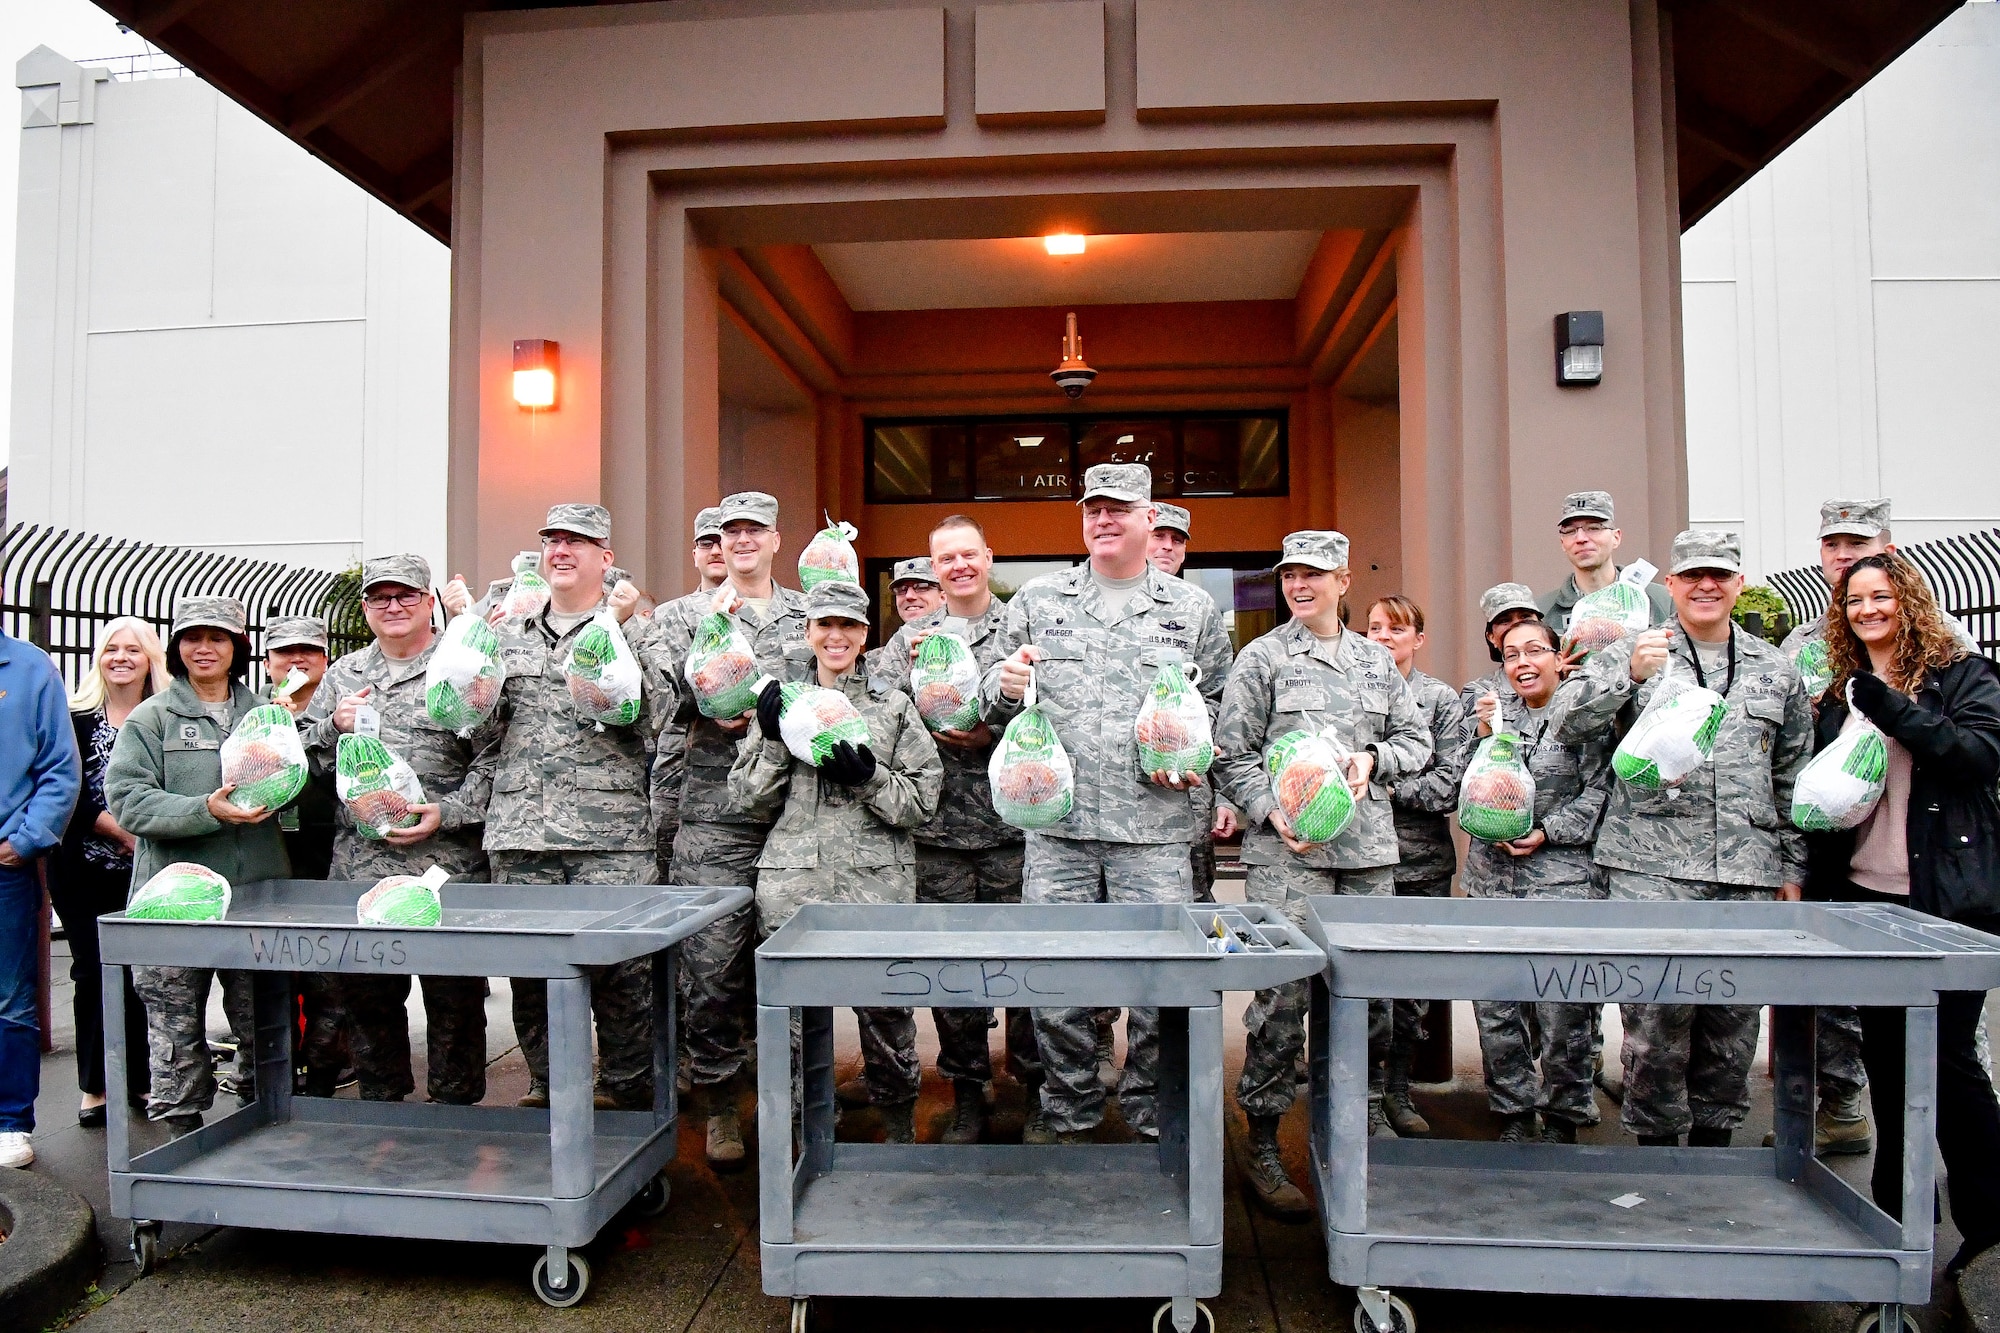 WADS members pose for a photo during the 8th annual Operation Turkey Drop, Nov. 16, 2017.  Operation Turkey Drop helps ease financial burdens of holiday expenses for Airmen and Soldiers on Joint Base Lewis-McChord and Camp Murray. The event is made possible by the Association of the United States Army, the Air Force Association and Pierce Military and Business Alliance and dozens of local businesses and organizations. (U.S. Air National Guard photo by Capt. Kimberly D. Burke)